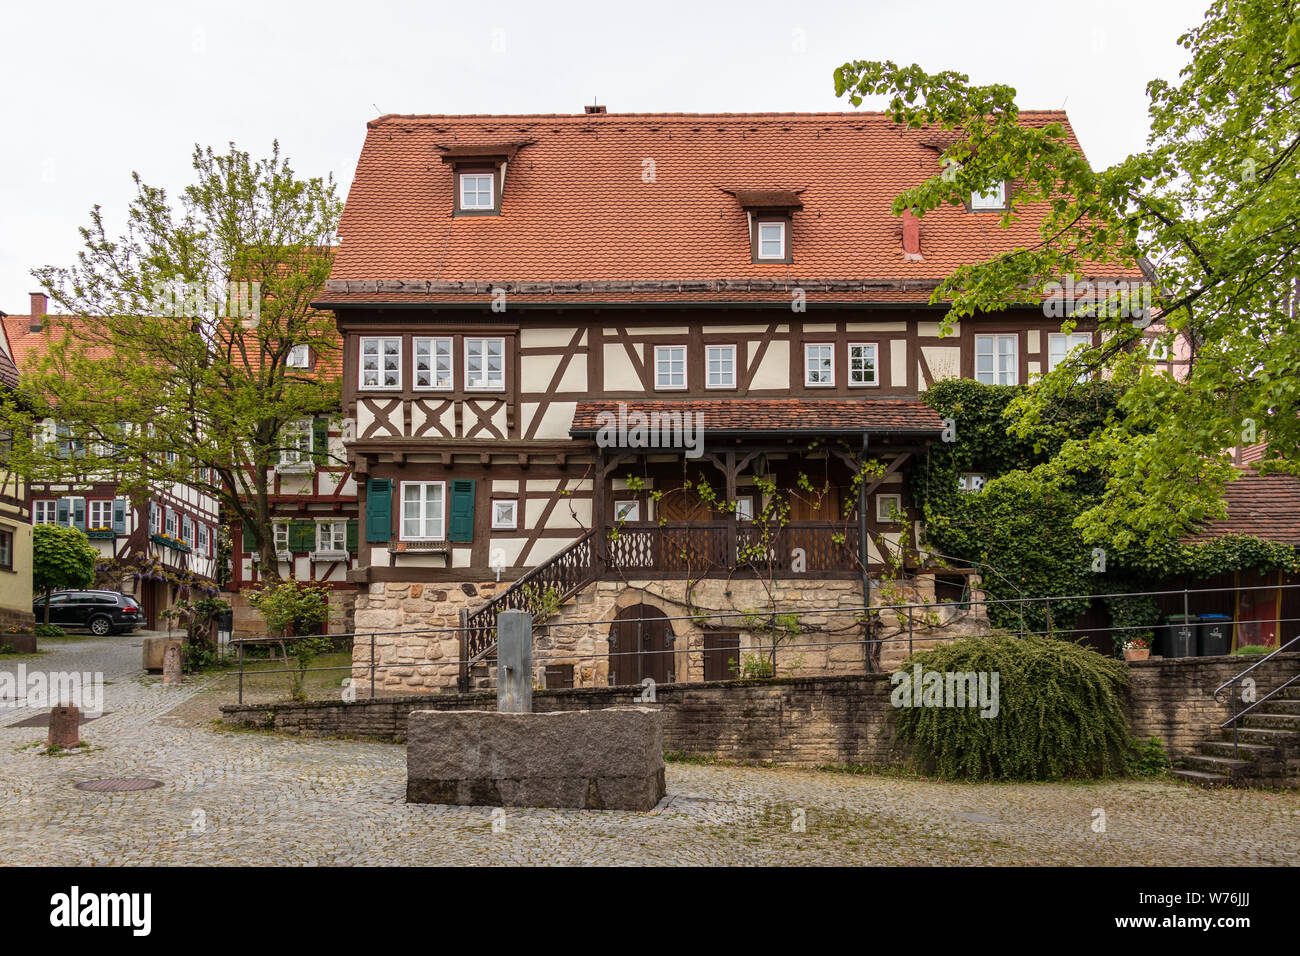 Sindelfingen, Baden Wurttemberg/Germany - May 11, 2019: Traditional Half-timbered house facades in Central District Road, Hintere Gasse. Stock Photo